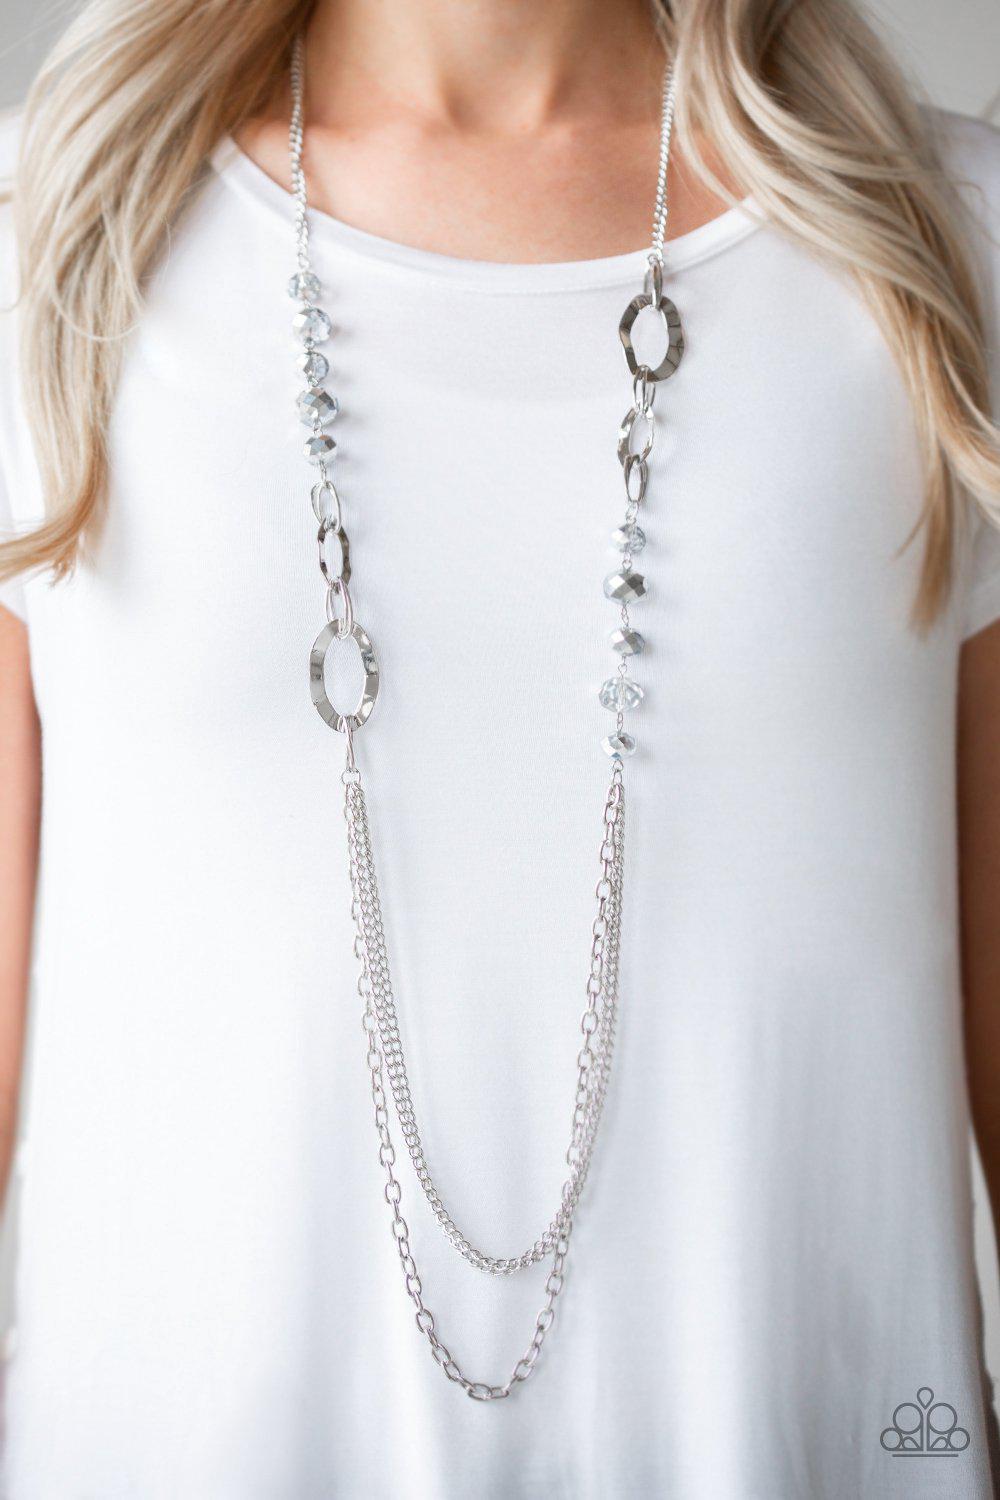 Modern Girl Glam Silver Necklace - Paparazzi Accessories- lightbox - CarasShop.com - $5 Jewelry by Cara Jewels